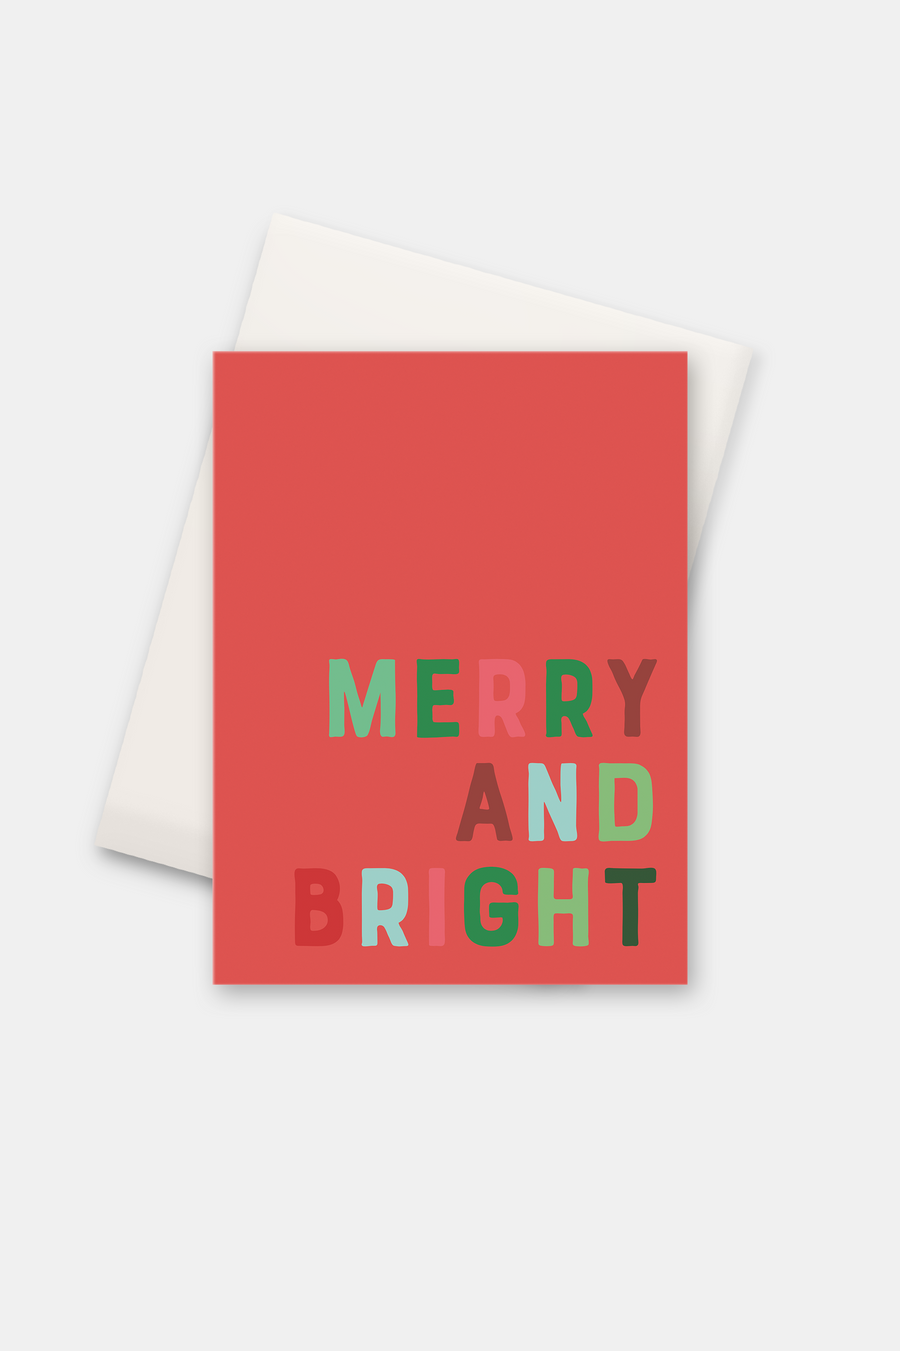 Merry and Bright!